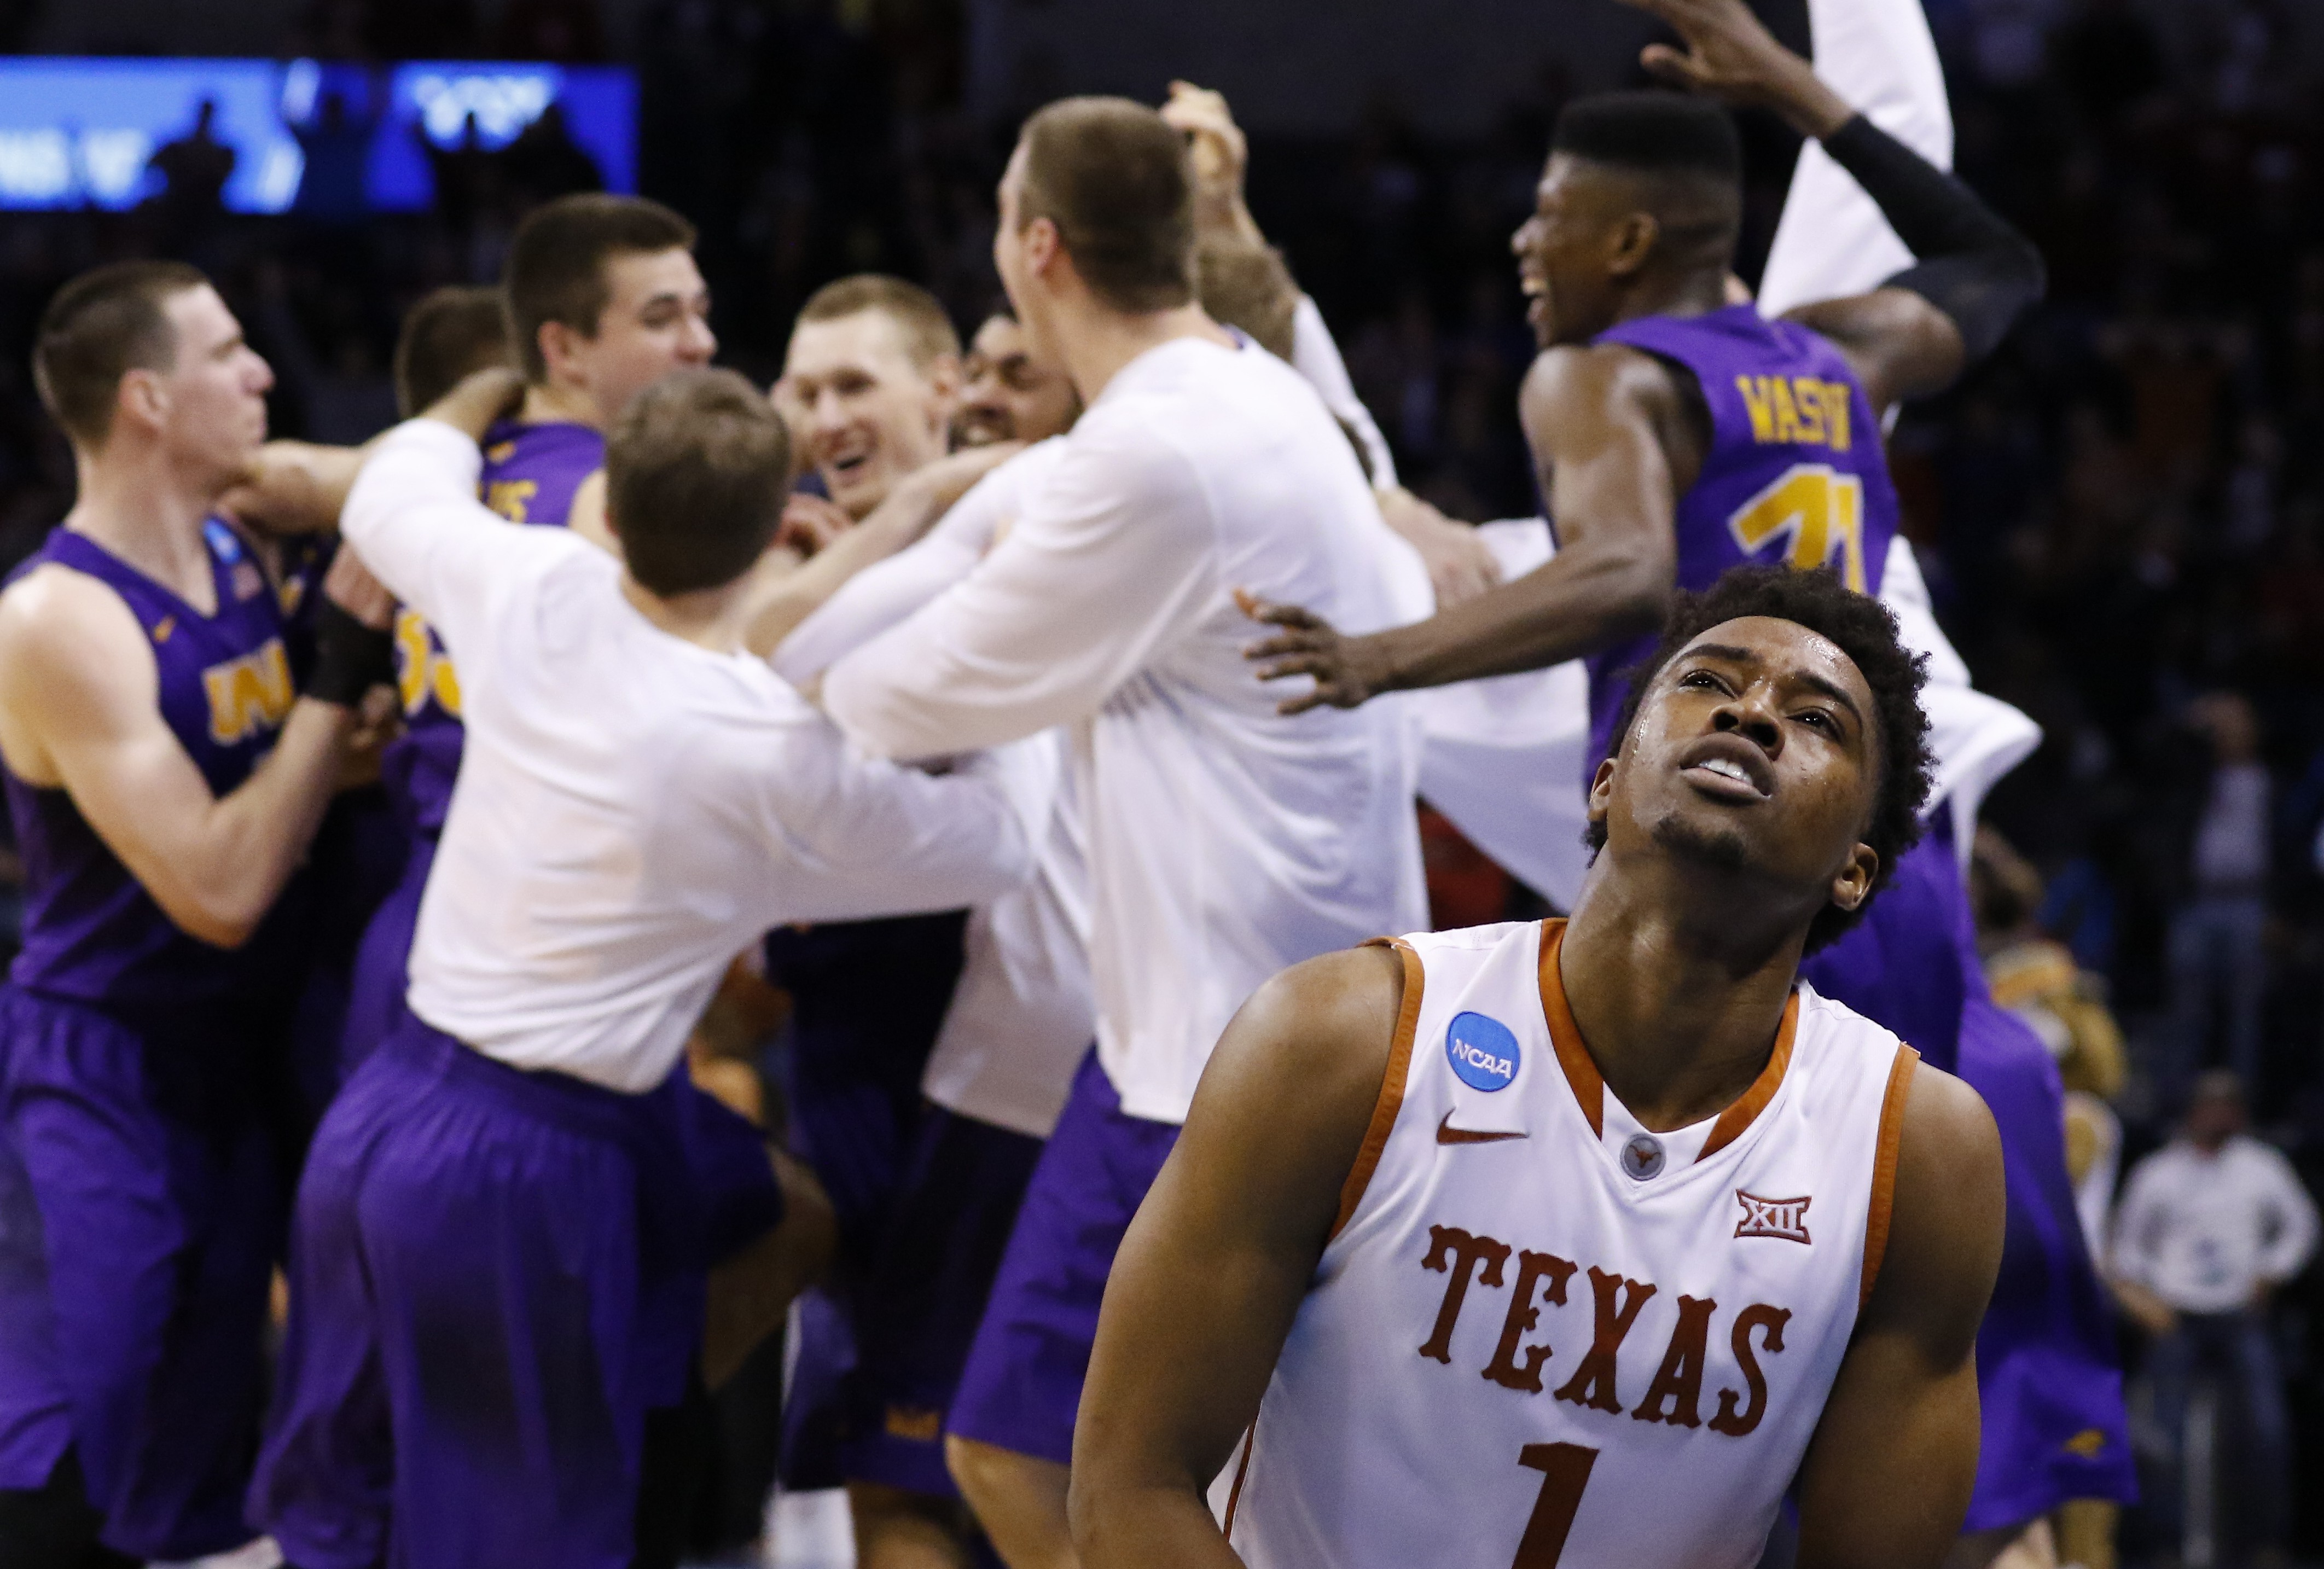 Texas guard Isaiah Taylor (1) reacts as the Northern Iowa team celebrates after guard Paul Jesperson made a last-second half-court shot to win the the first-round men's college basketball game in the NCAA Tournament in Oklahoma City, Friday, March 18, 2016. Northern Iowa won 75-72. (AP Photo/Alonzo Adams)